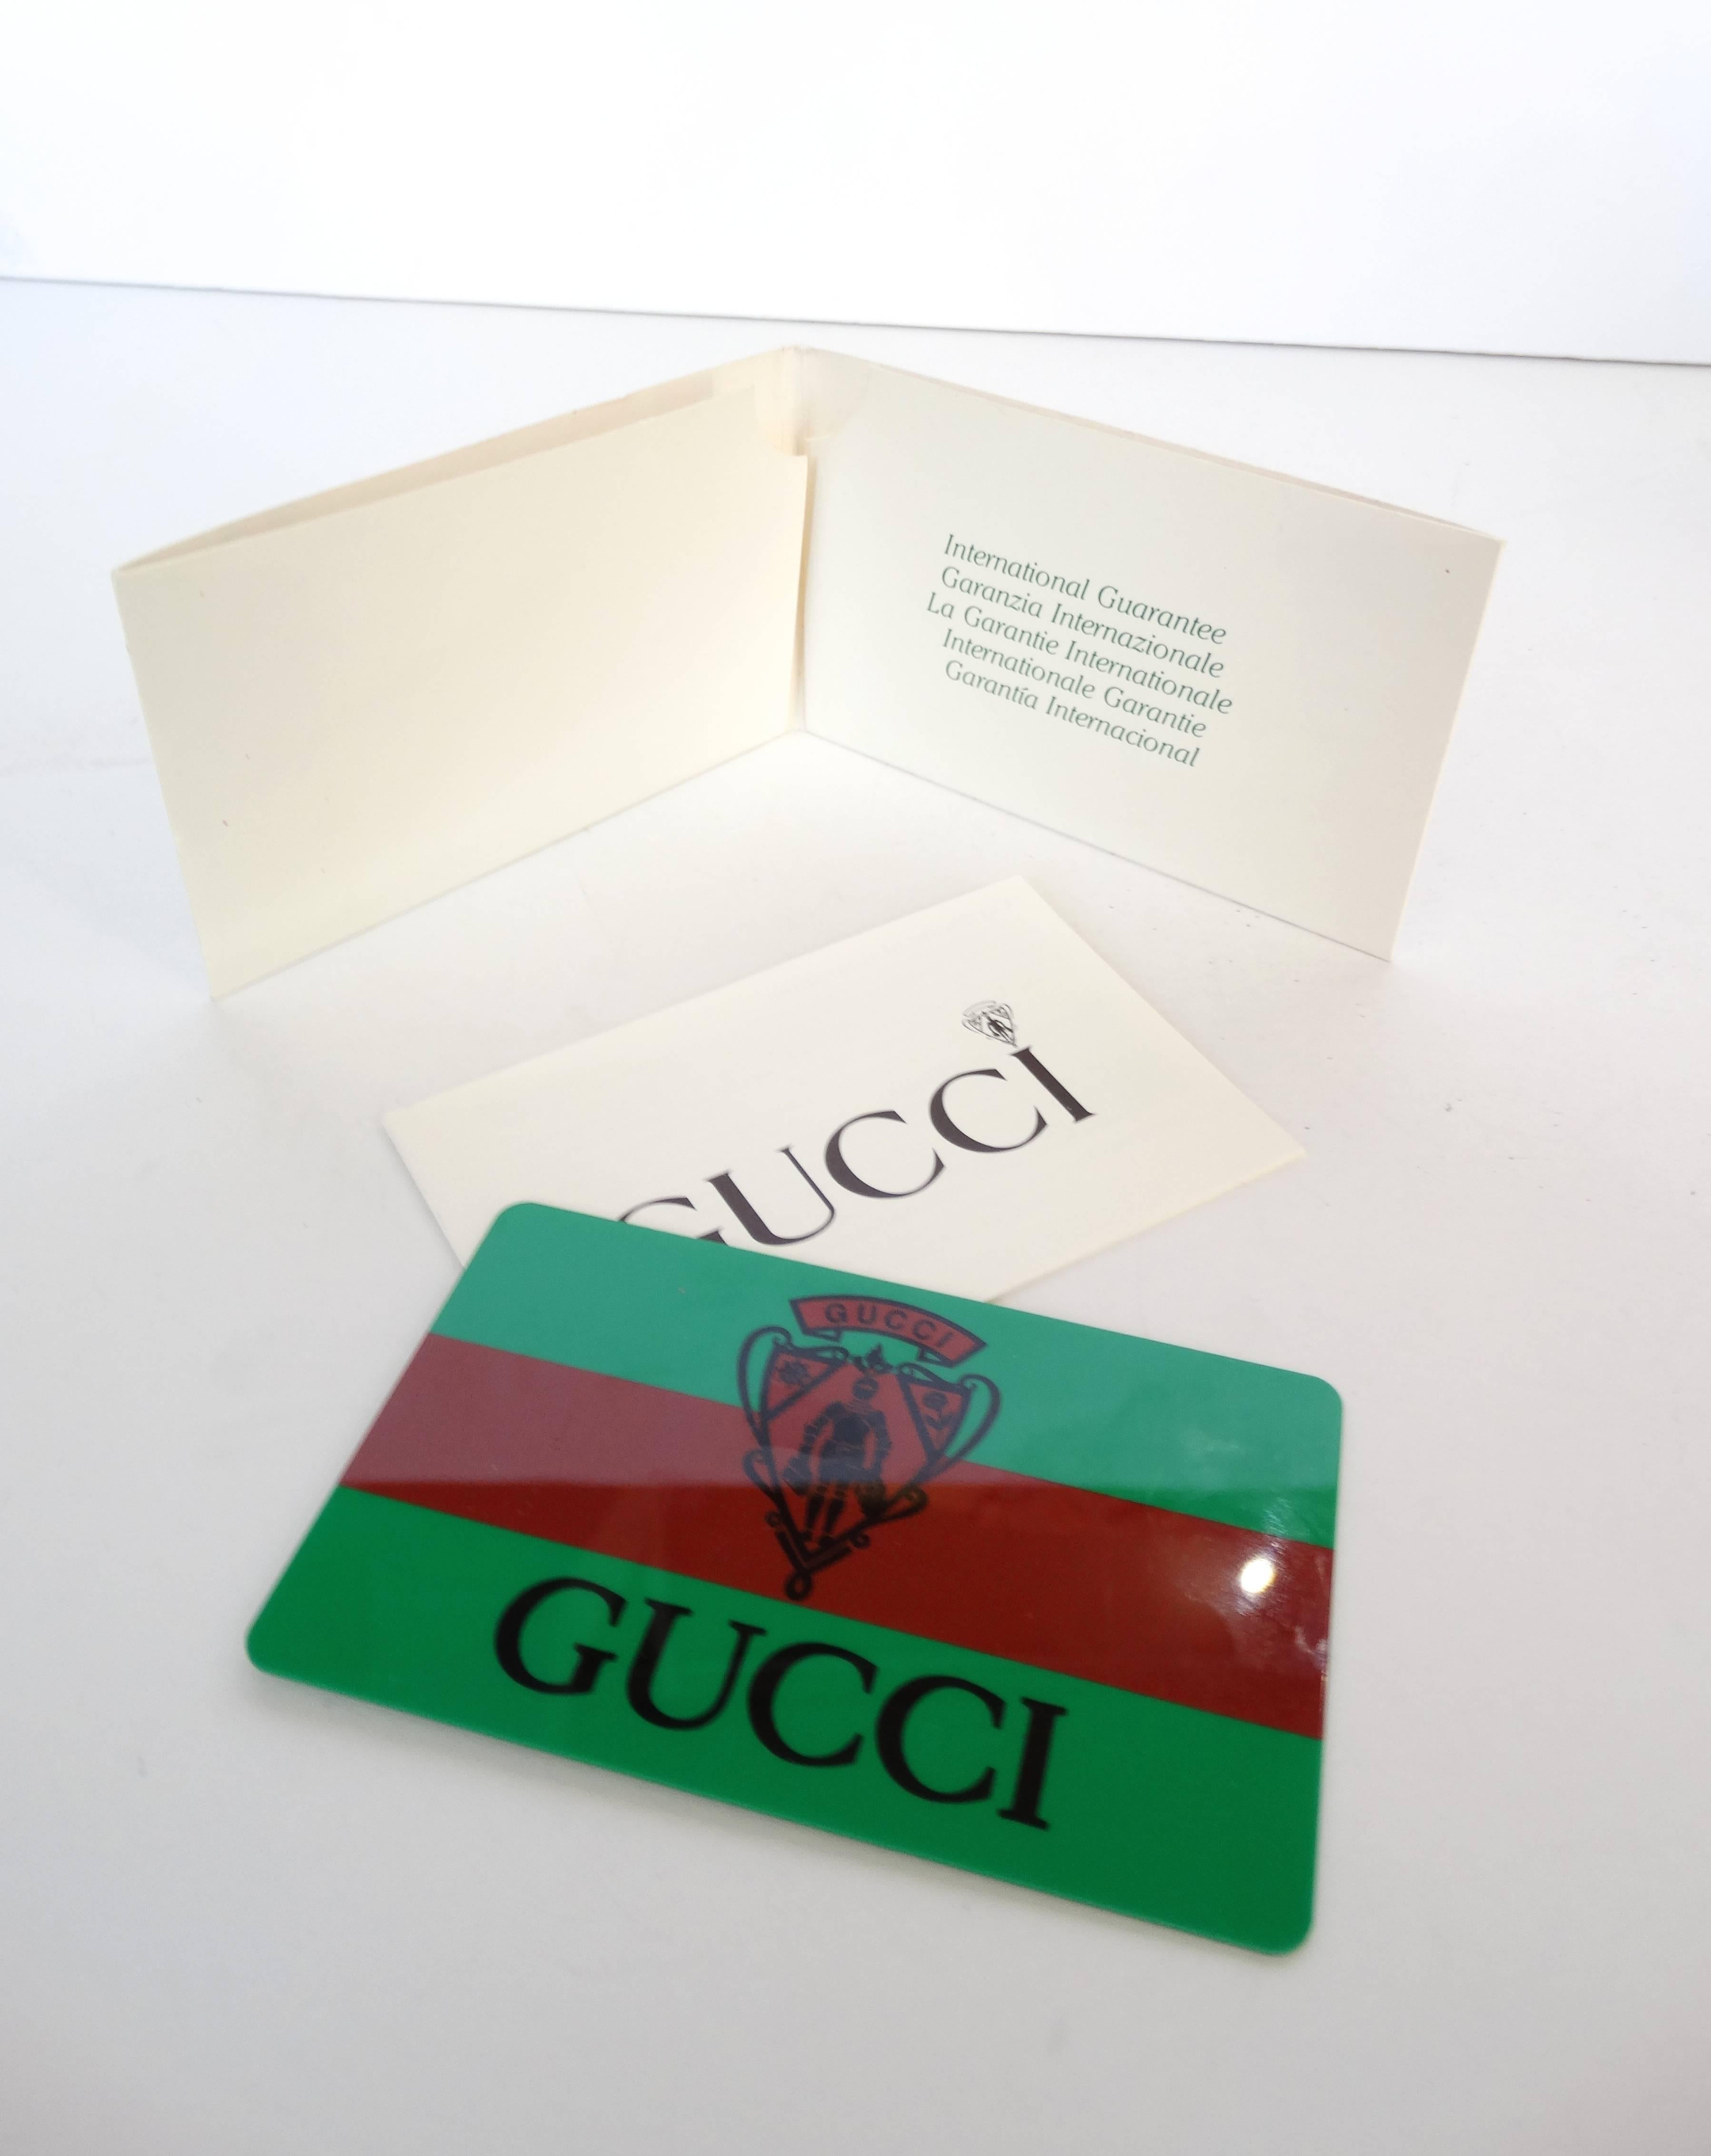 Have a Gucci watch for every day of the week with our watch and bezel set! Comes with gold metal Gucci bangle watch and original box full of an array of colorful bezels. Includes green and red classic stripe Gucci bezel. Signed Gucci Made in Italy